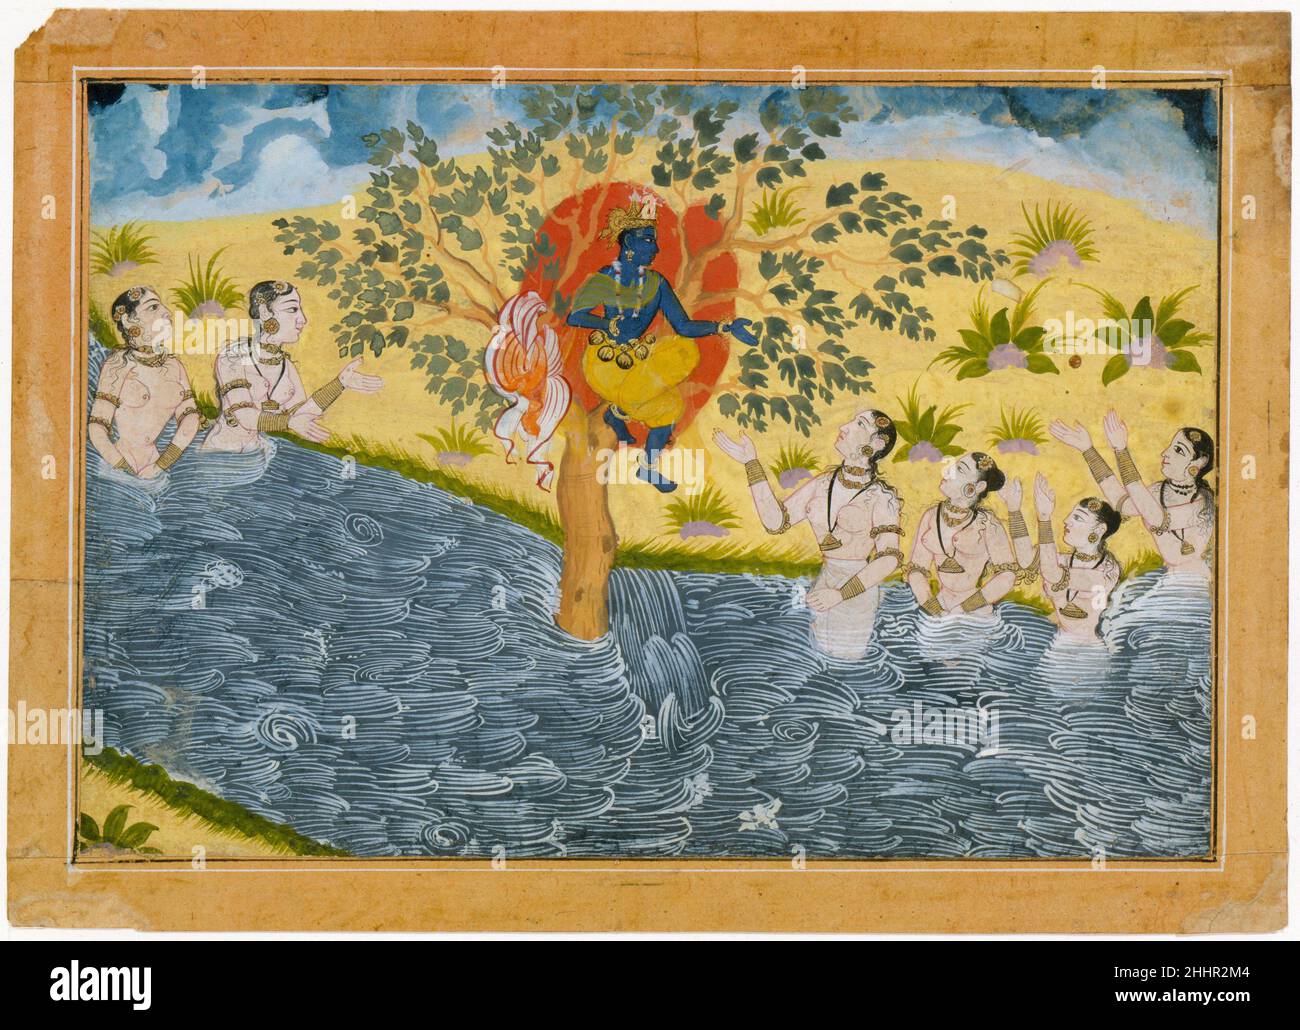 The Gopis Plead with Krishna to Return Their Clothing, Page from a Bhagavata Purana (Ancient Stories of Lord Vishnu) series ca. 1610 India (Rajasthan, Bikaner) Krishna sits high in a tree with the clothing he has playfully stolen from the bathing gopis (cow maids). They look on with love, praying for union with the god in a passionate expression of bhakti (devotional worship). The artist has employed a limited Rajput color scheme in conjunction with elements of Mughal derivation, such as the foliage and naturalistic treatment of the water.. The Gopis Plead with Krishna to Return Their Clothing Stock Photo